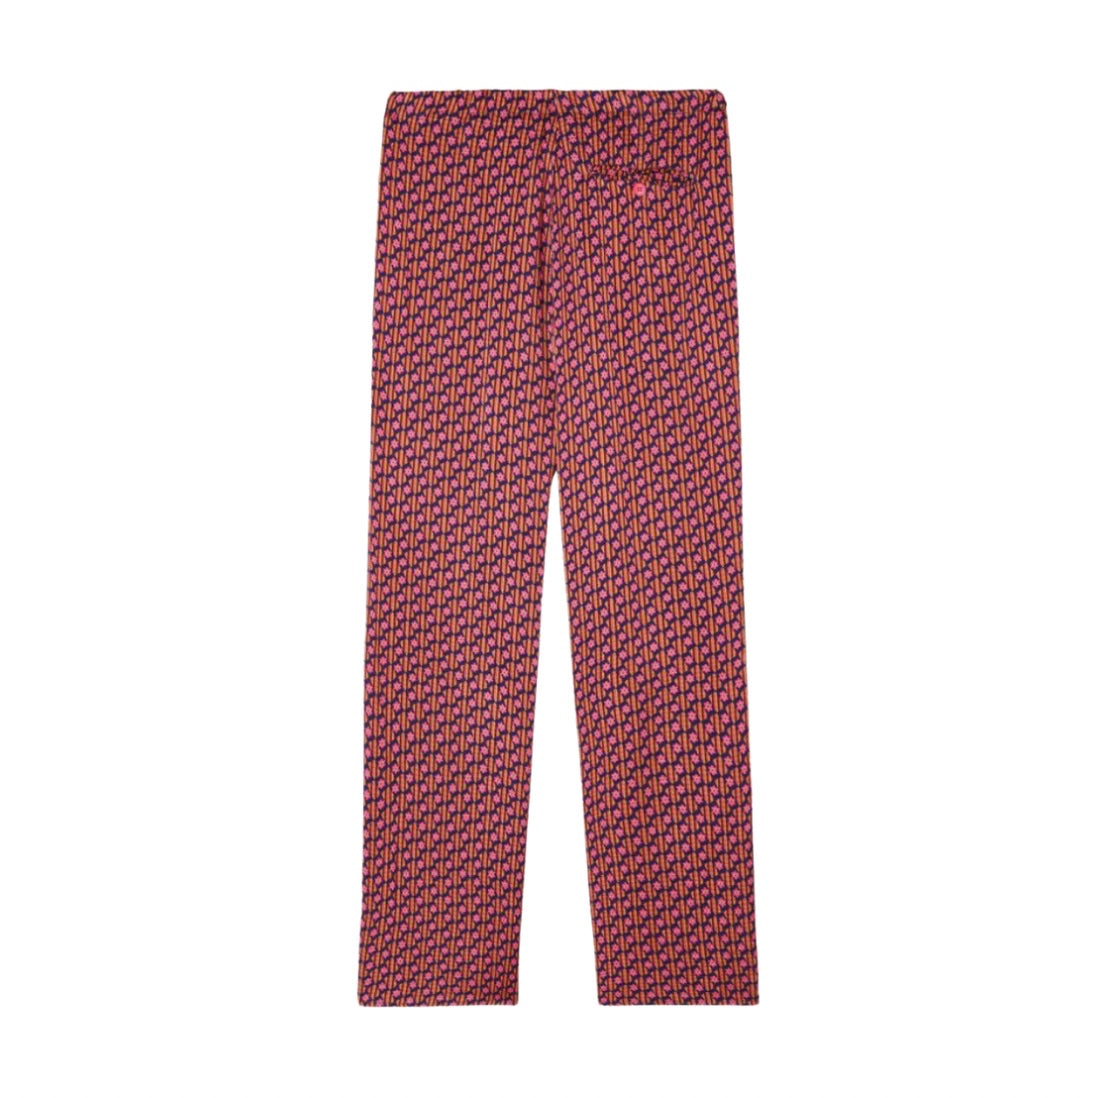 American Vintage Shaning trousers seen from the reverse